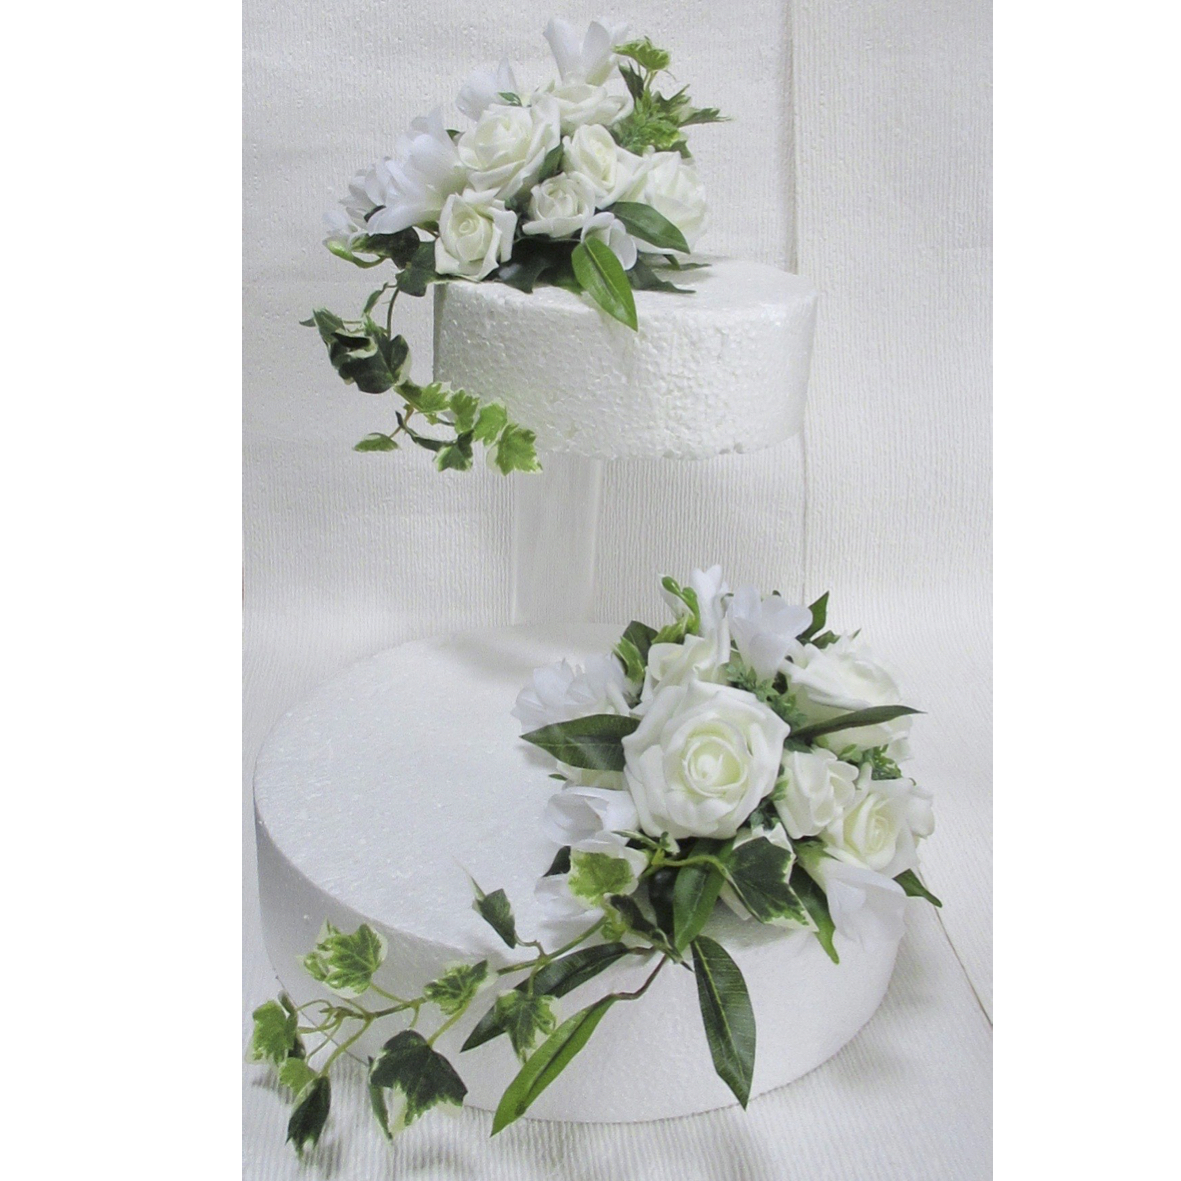 Roses, Hydrangea & Freesia with trailing ivy Cake Toppers